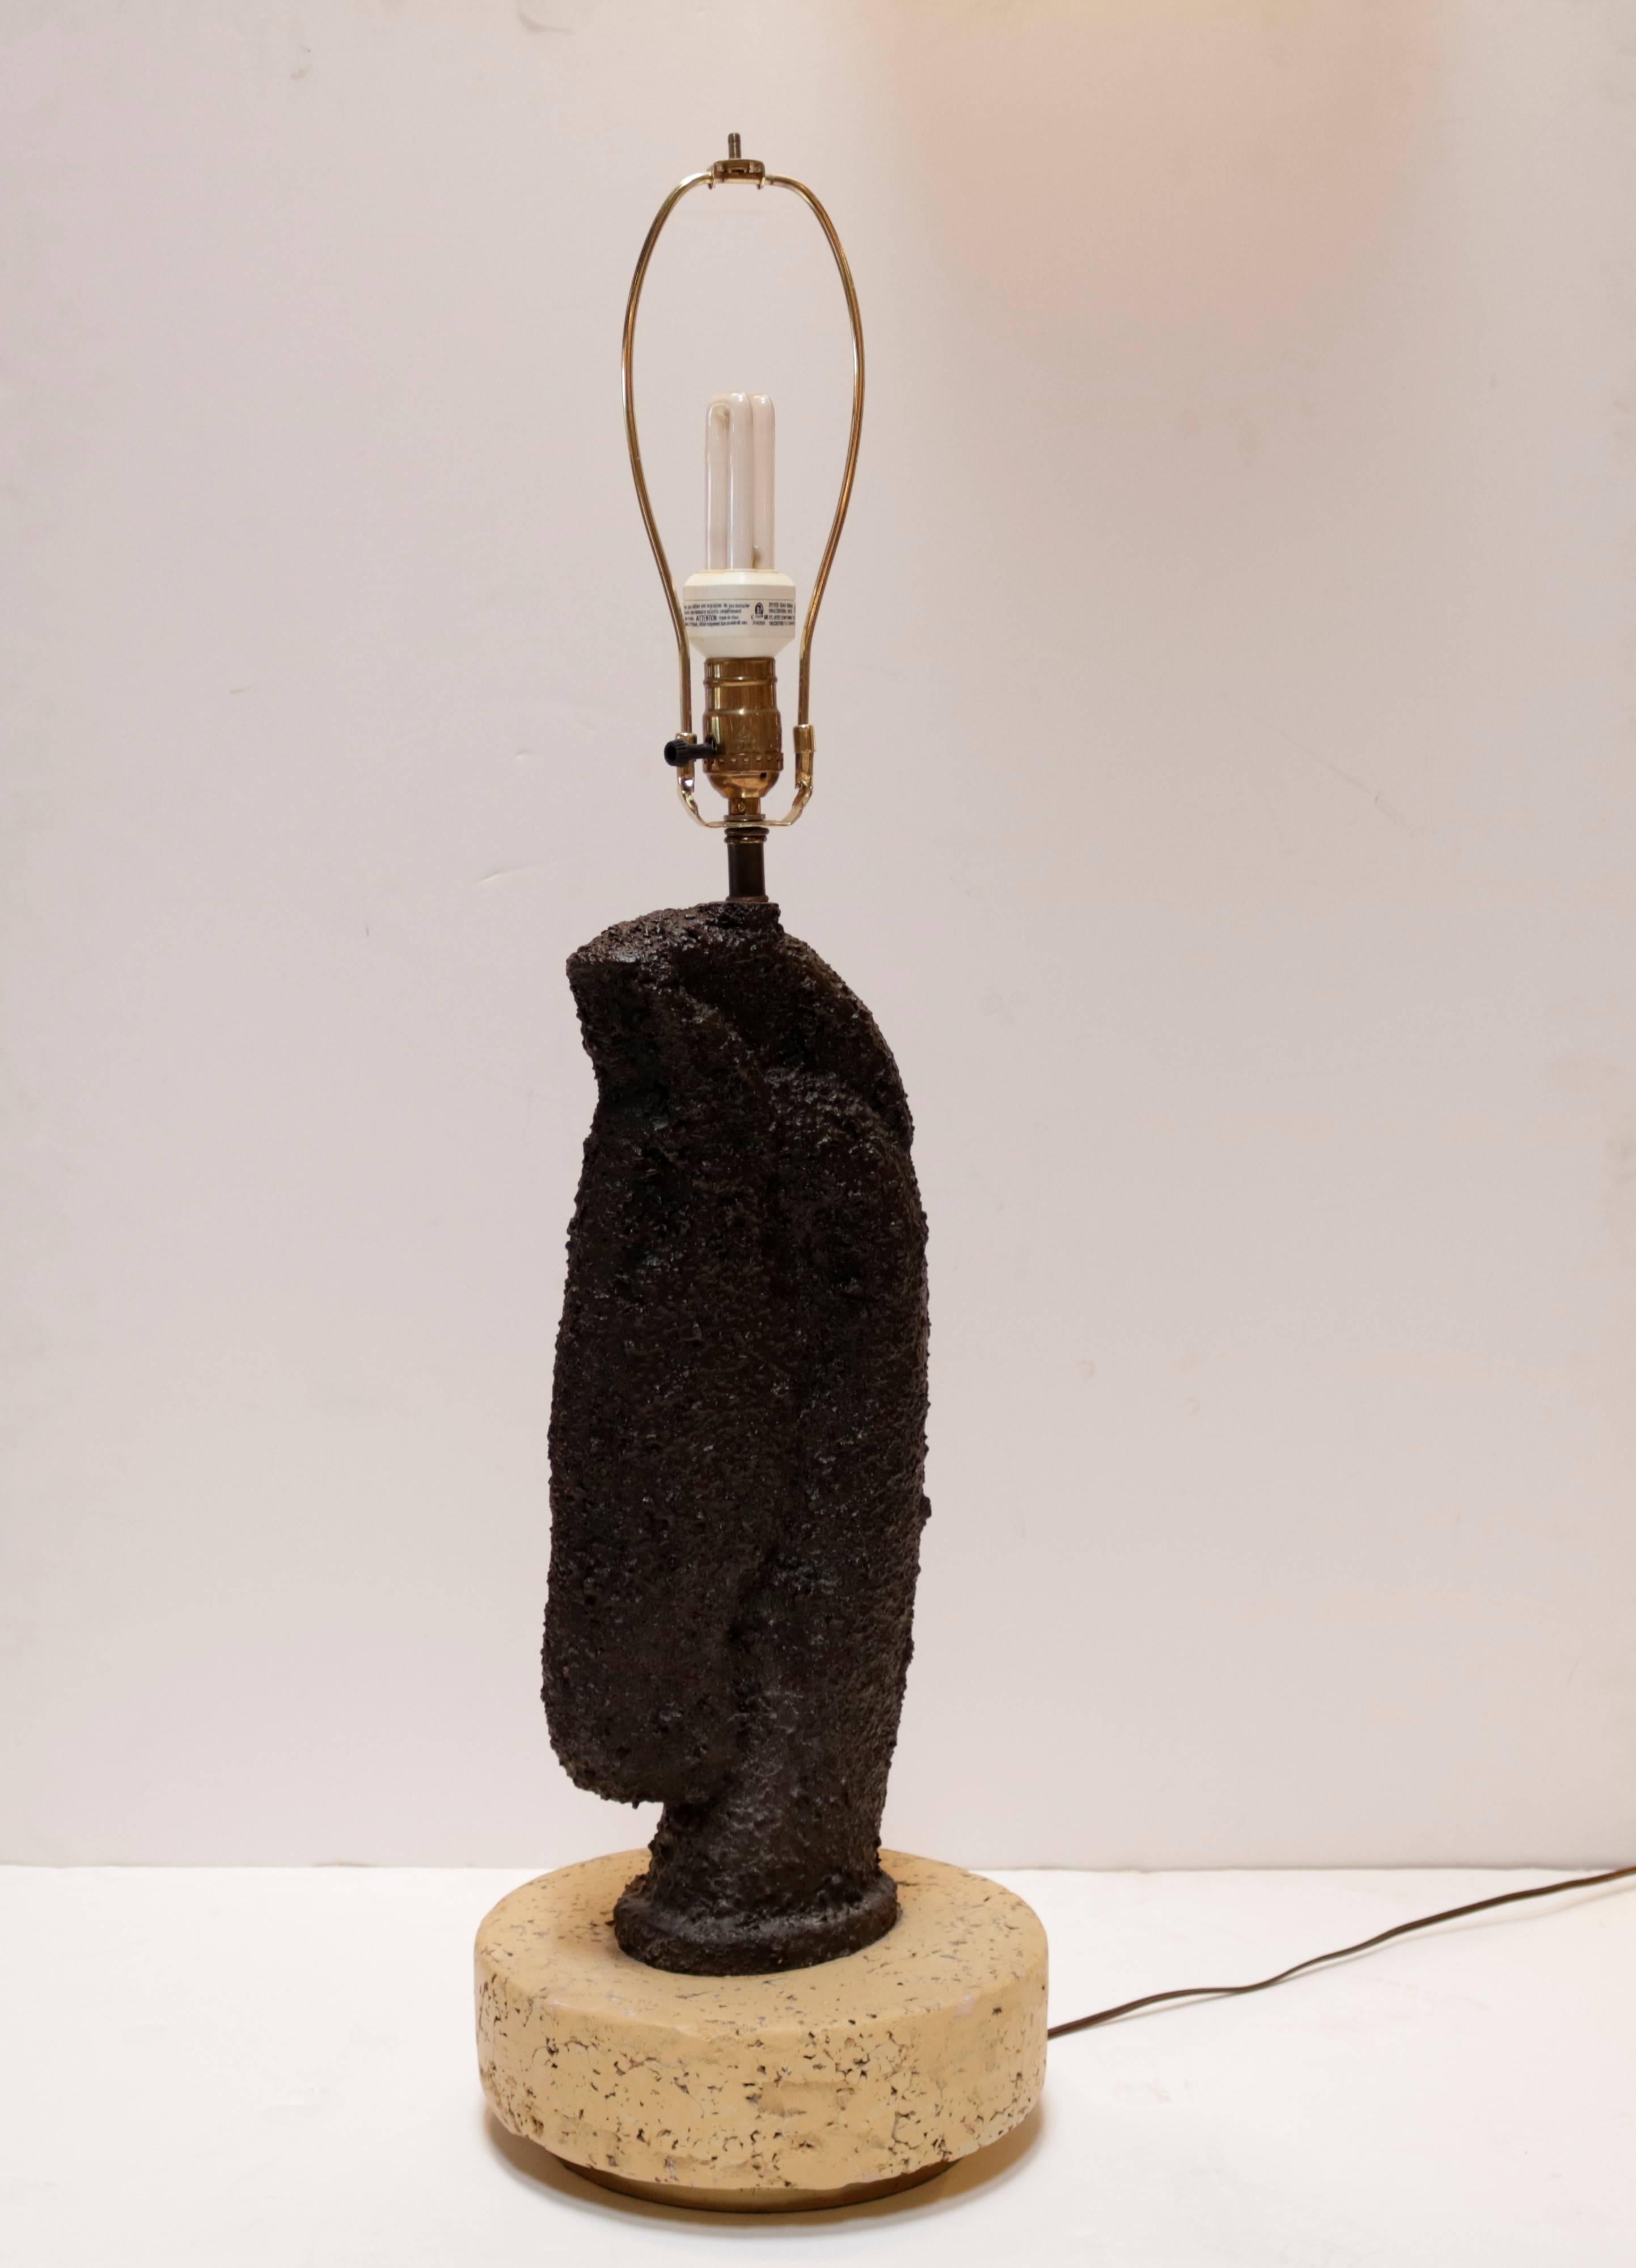 This unique pair of horse head lamps are rendered in bubbly black resin. They are mounted on thick cork platforms with inset brass bases. The new custom-made lampshades are a light beige linen matching the bases.